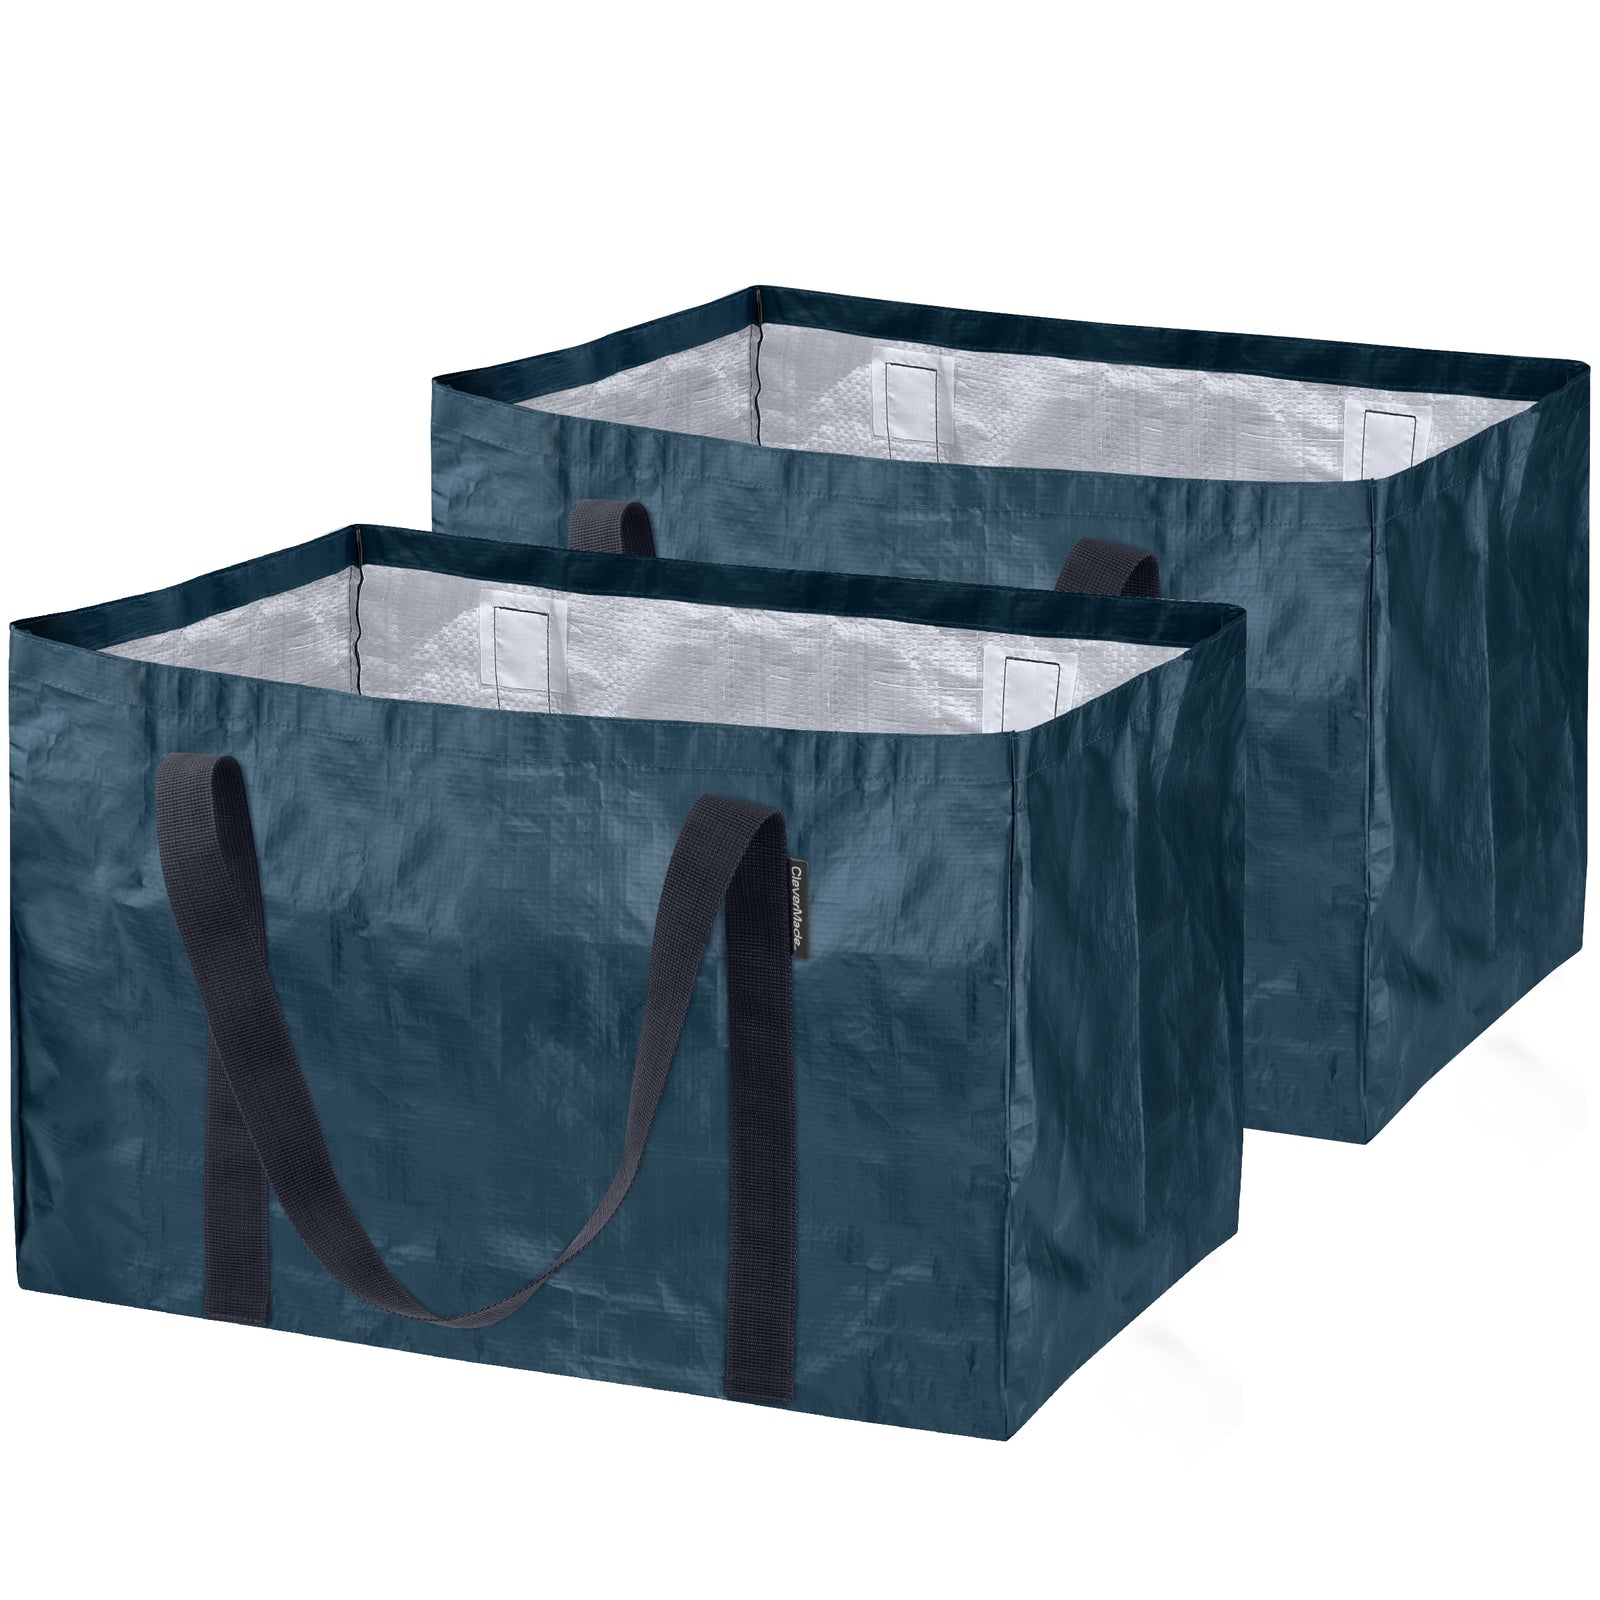 Recertified - Clevermade Eco 24L Collapsible Reusable Plastic Grocery Shopping Baskets 3 Pack